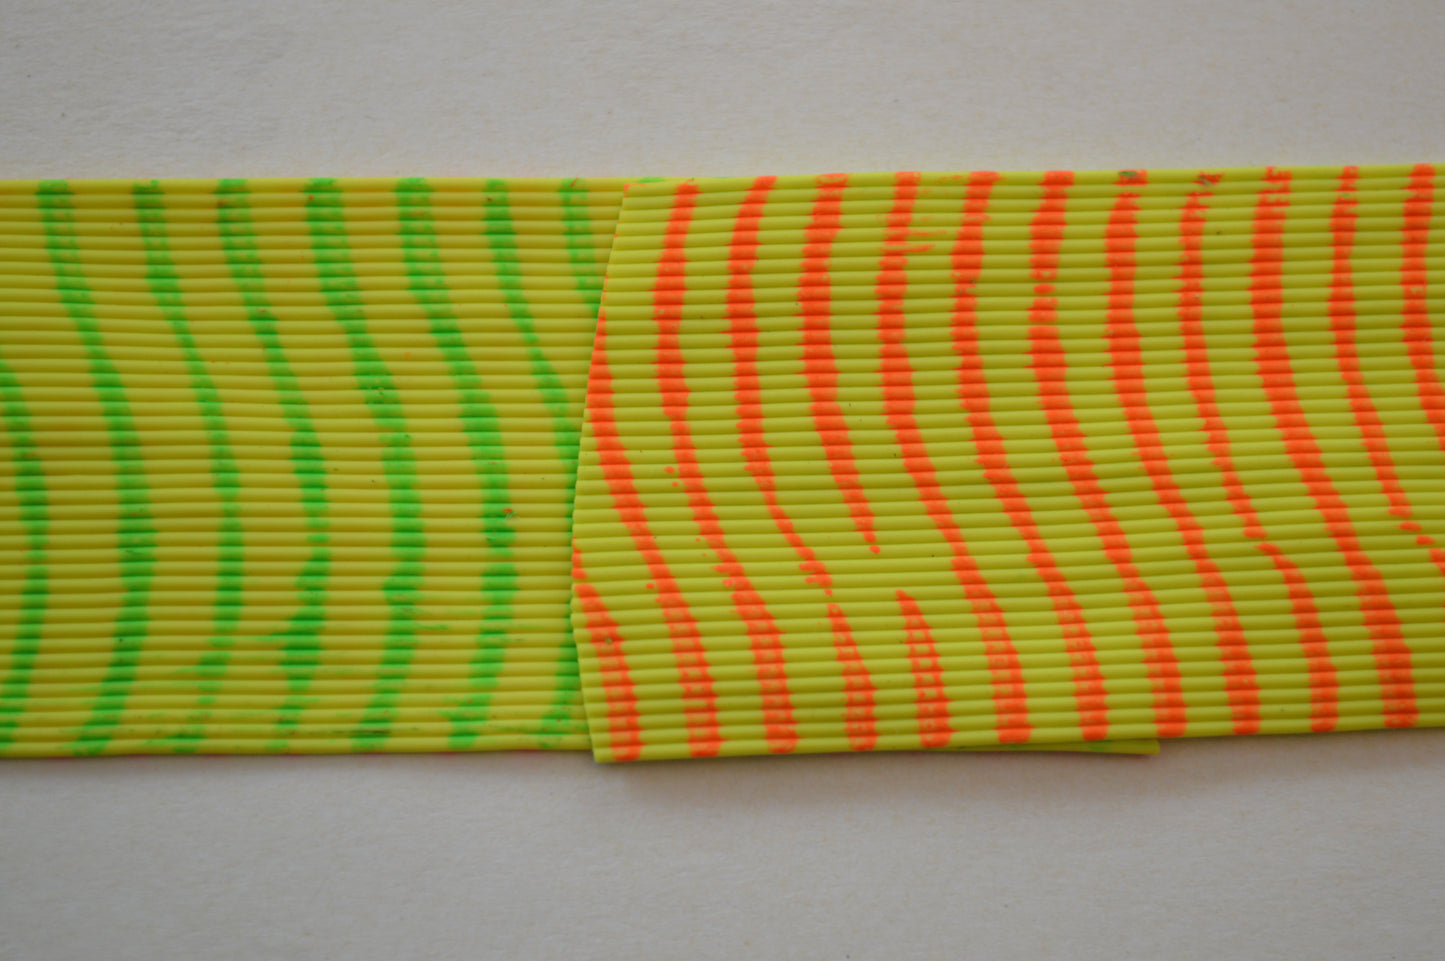 Medium Reptile Rubber Chartreuse with Orange on 1 side and Lime on 1 side-C-02-04